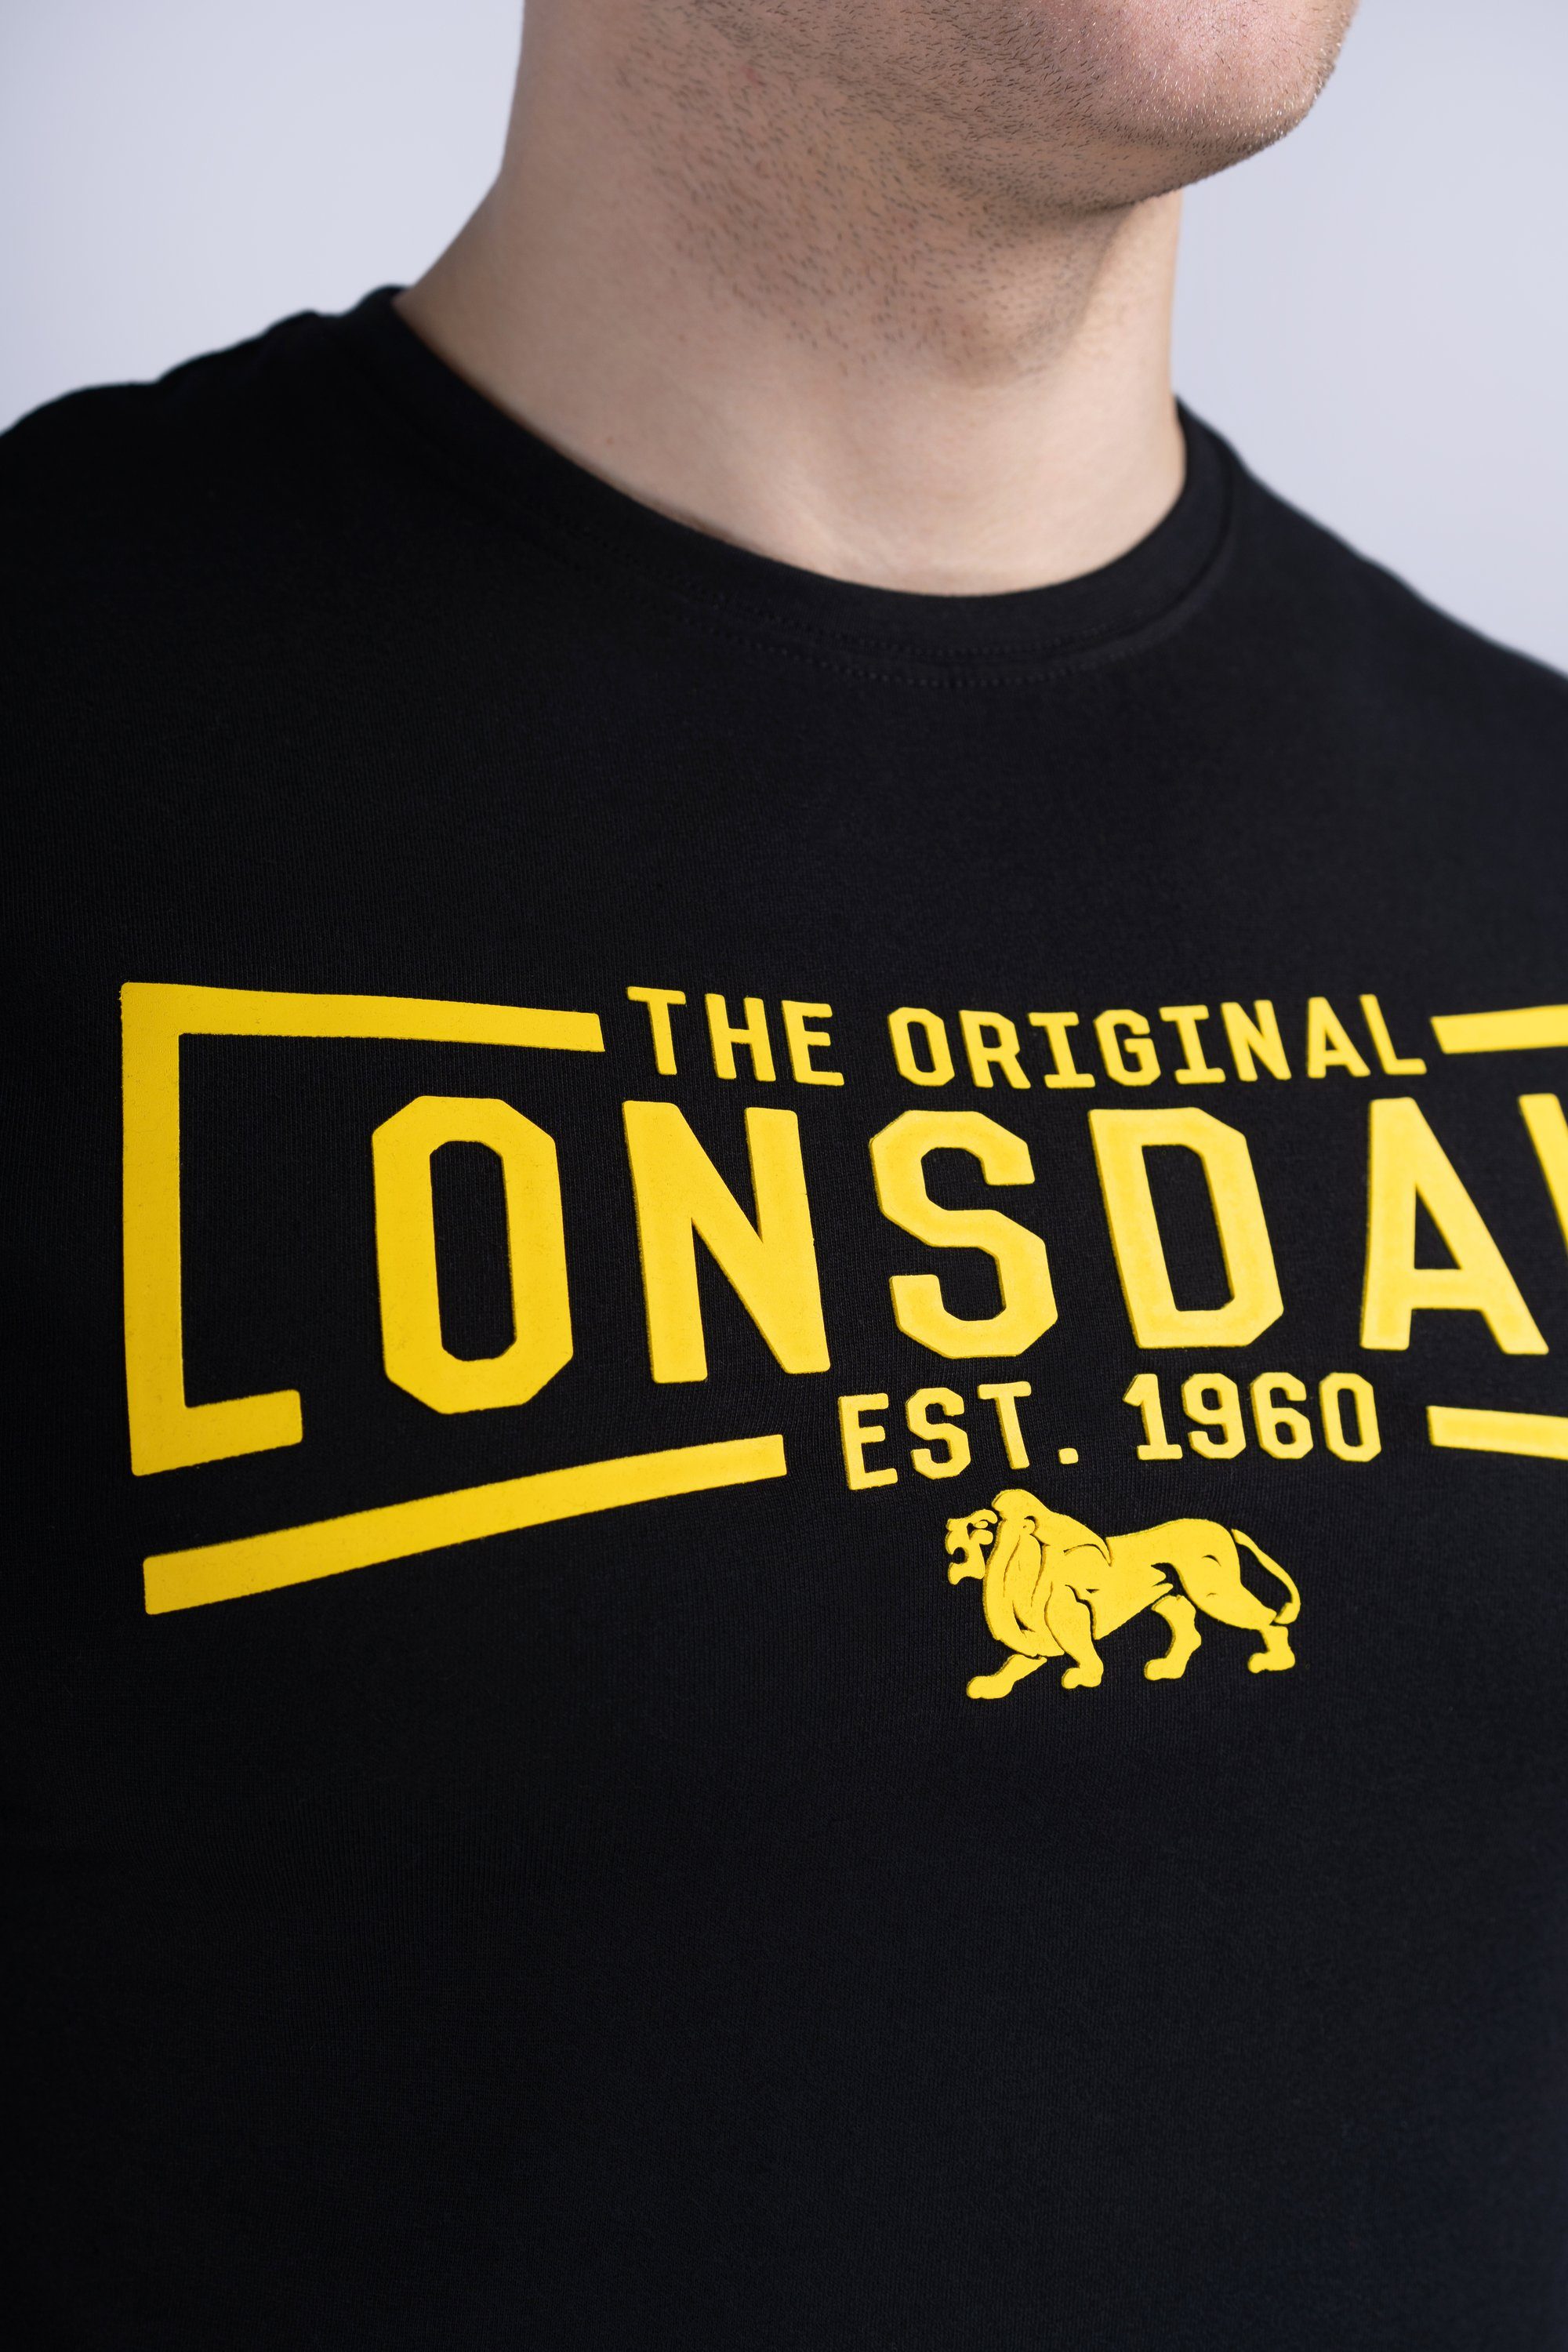 Lonsdale NYBSTER T-Shirt Black/Yellow